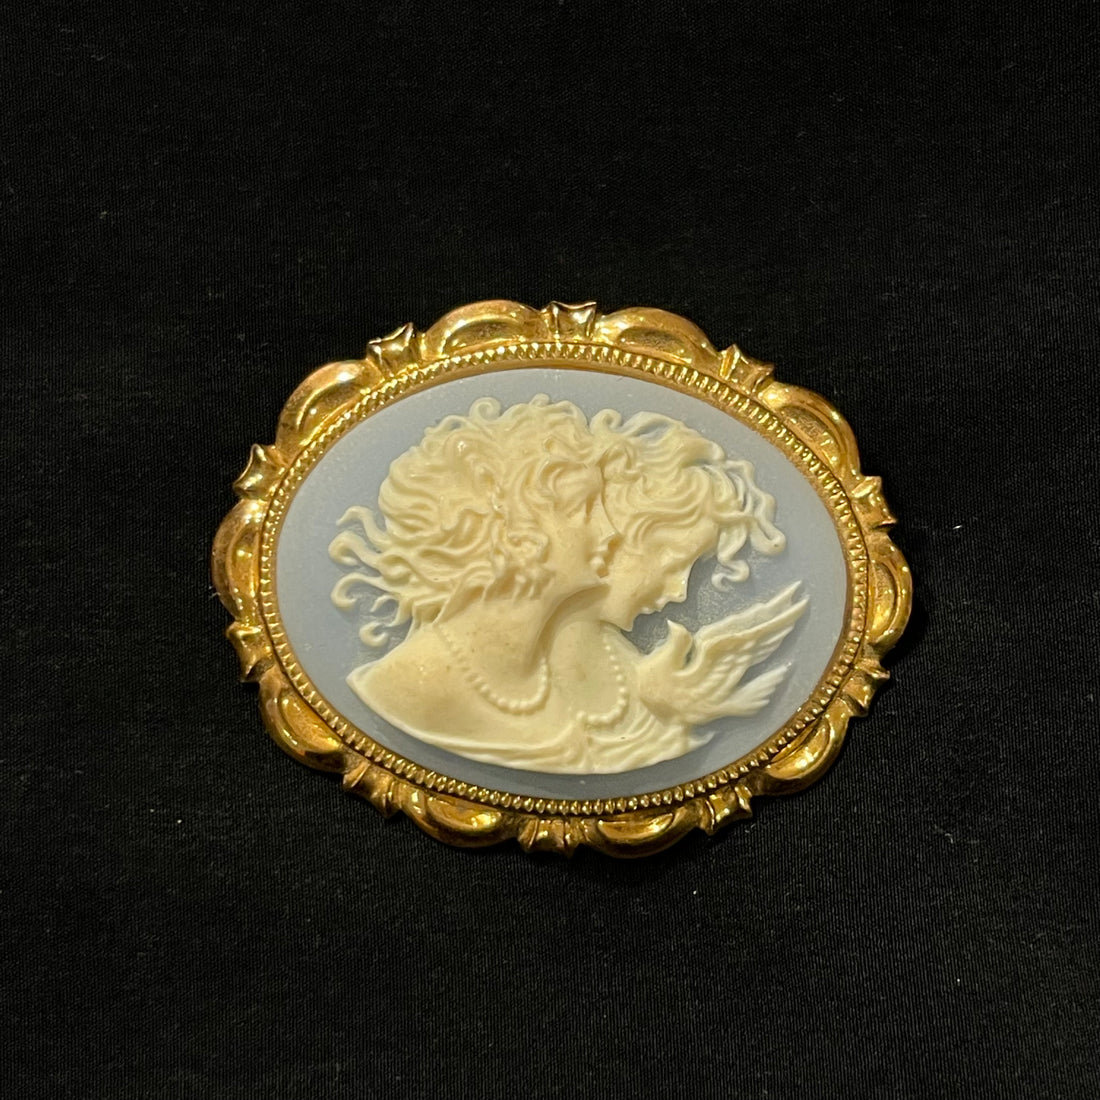 Blue and White Vintage Oval Cameo Brooch with Gold Trim